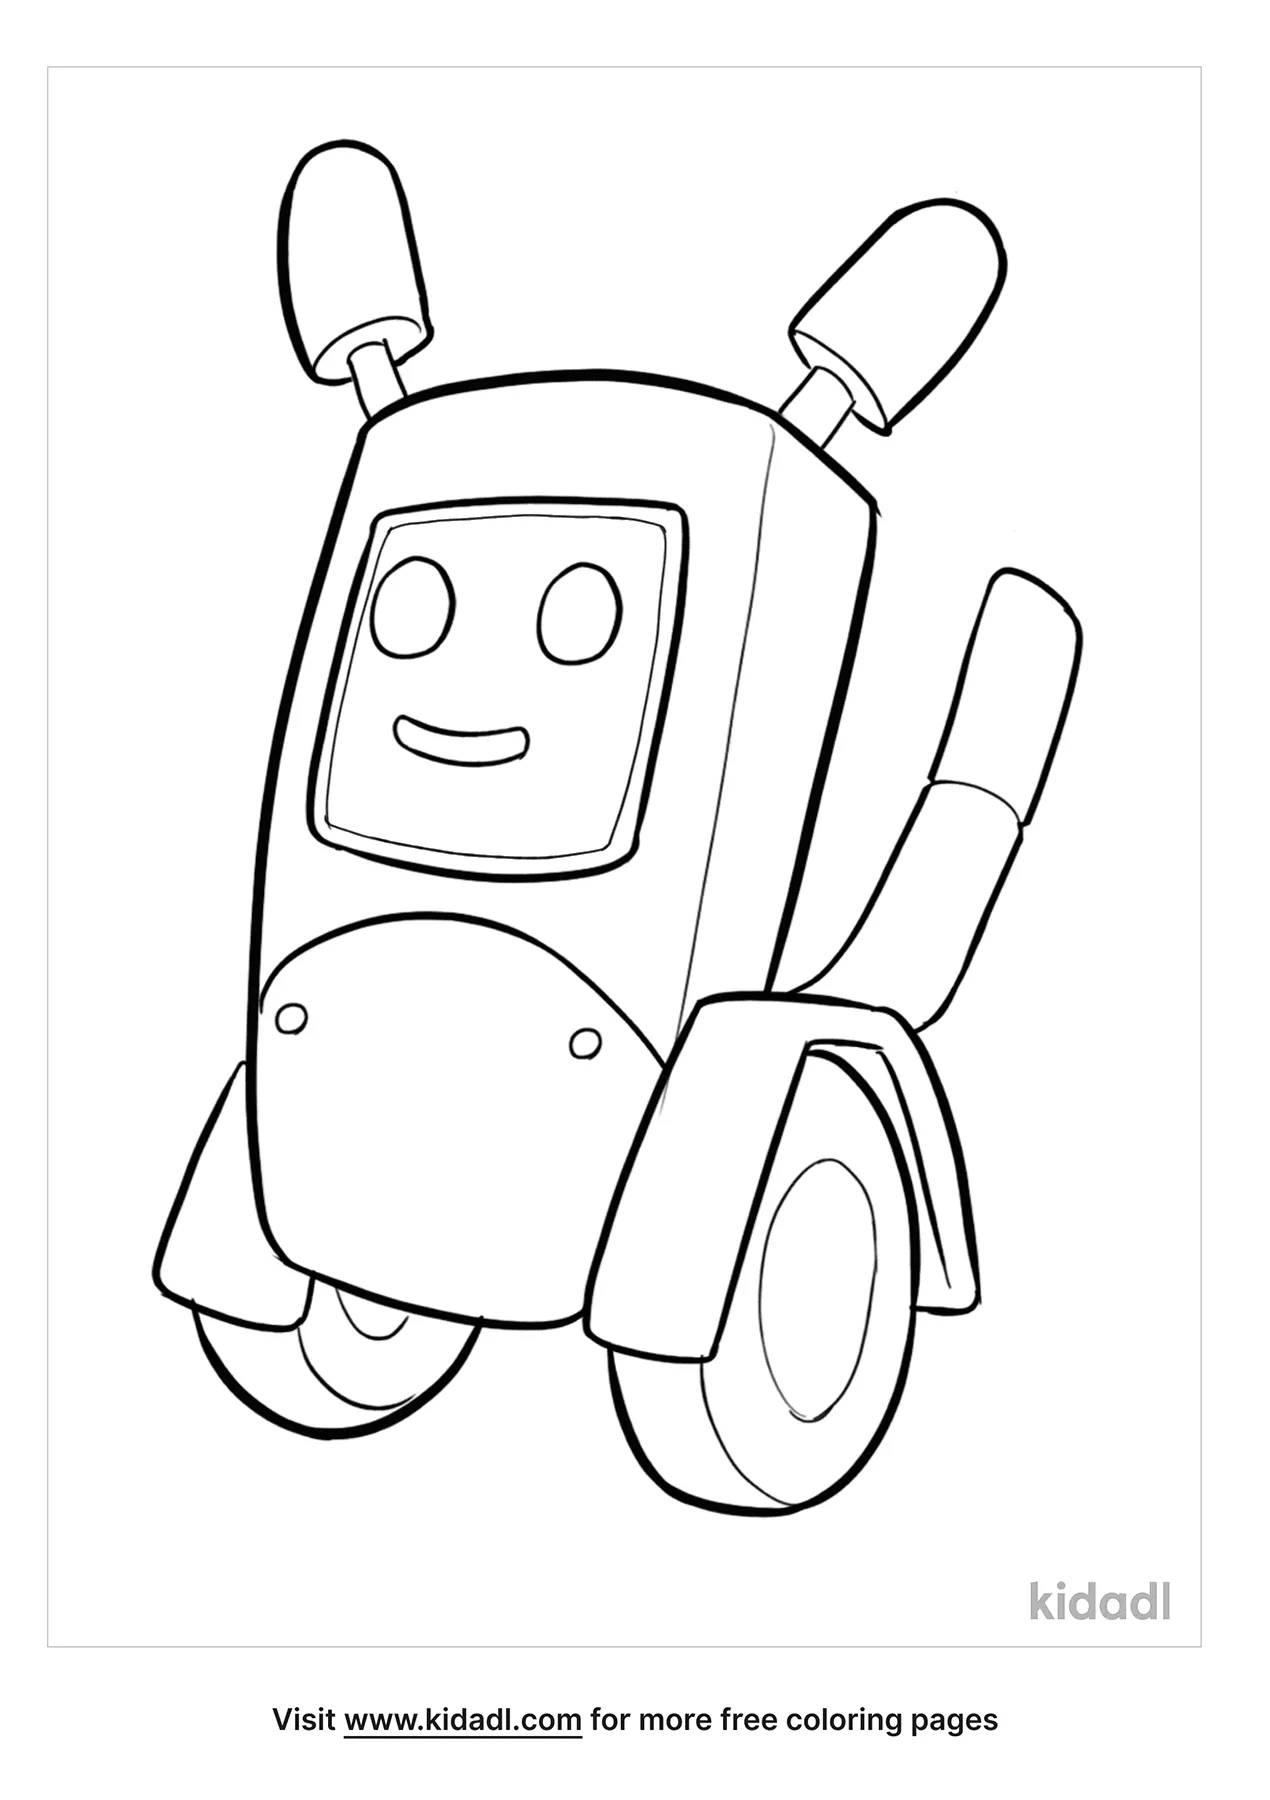 Free Robot Coloring Page | Coloring Page Printables | Kidadl